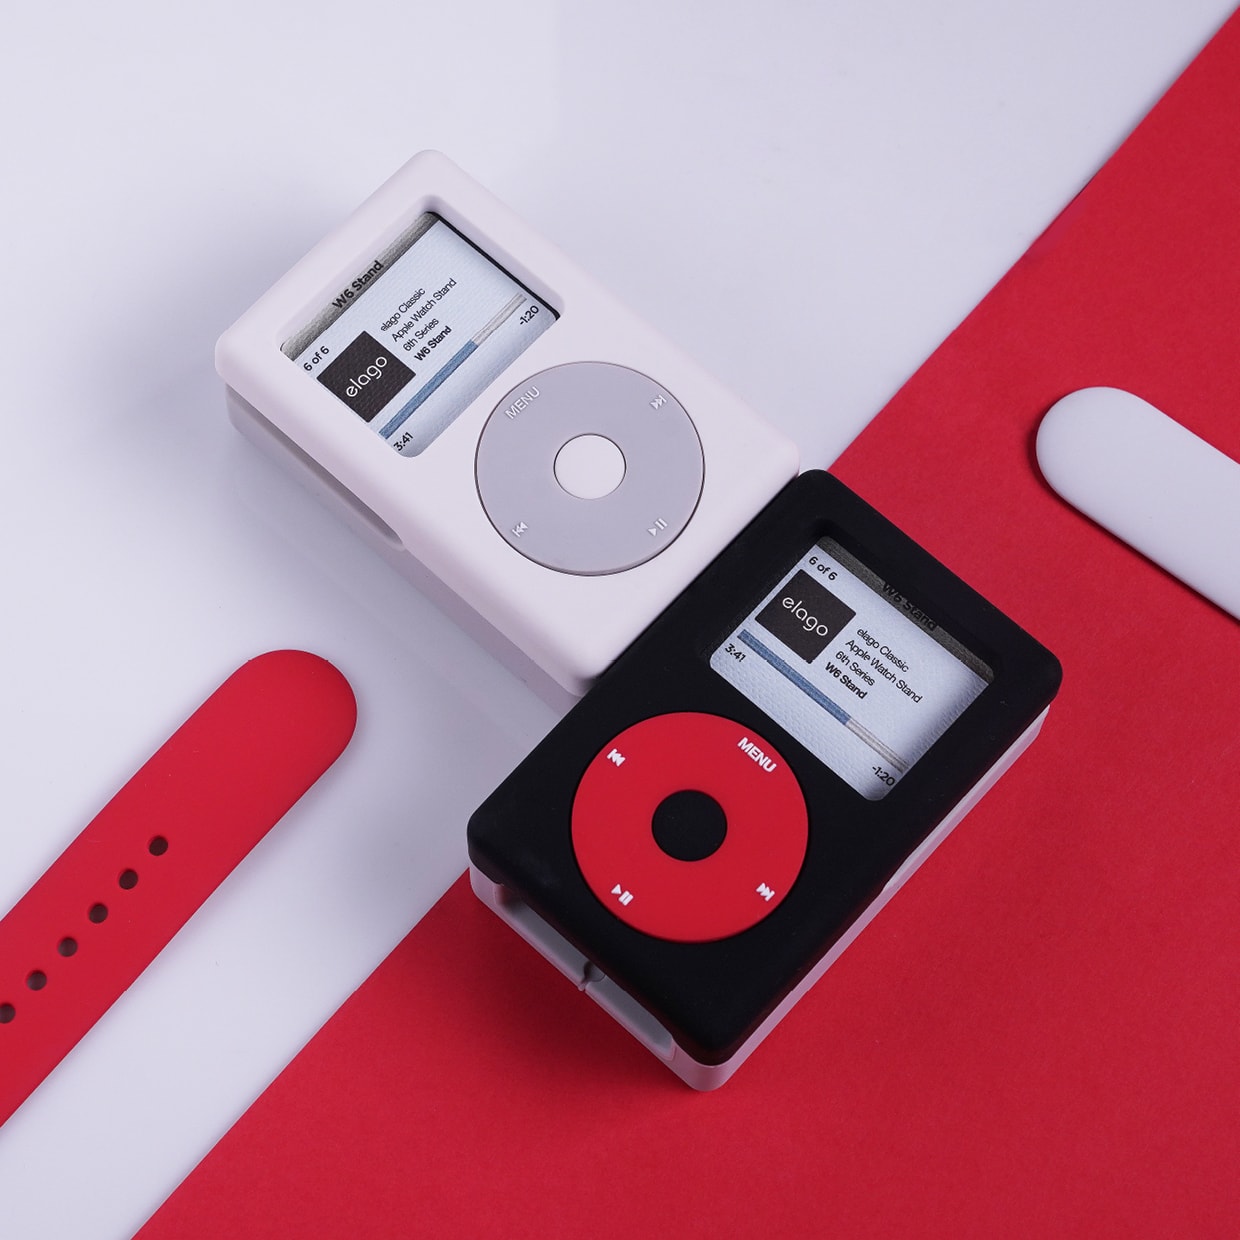 New Stand for Apple Watch is Inspired by iPod Classic